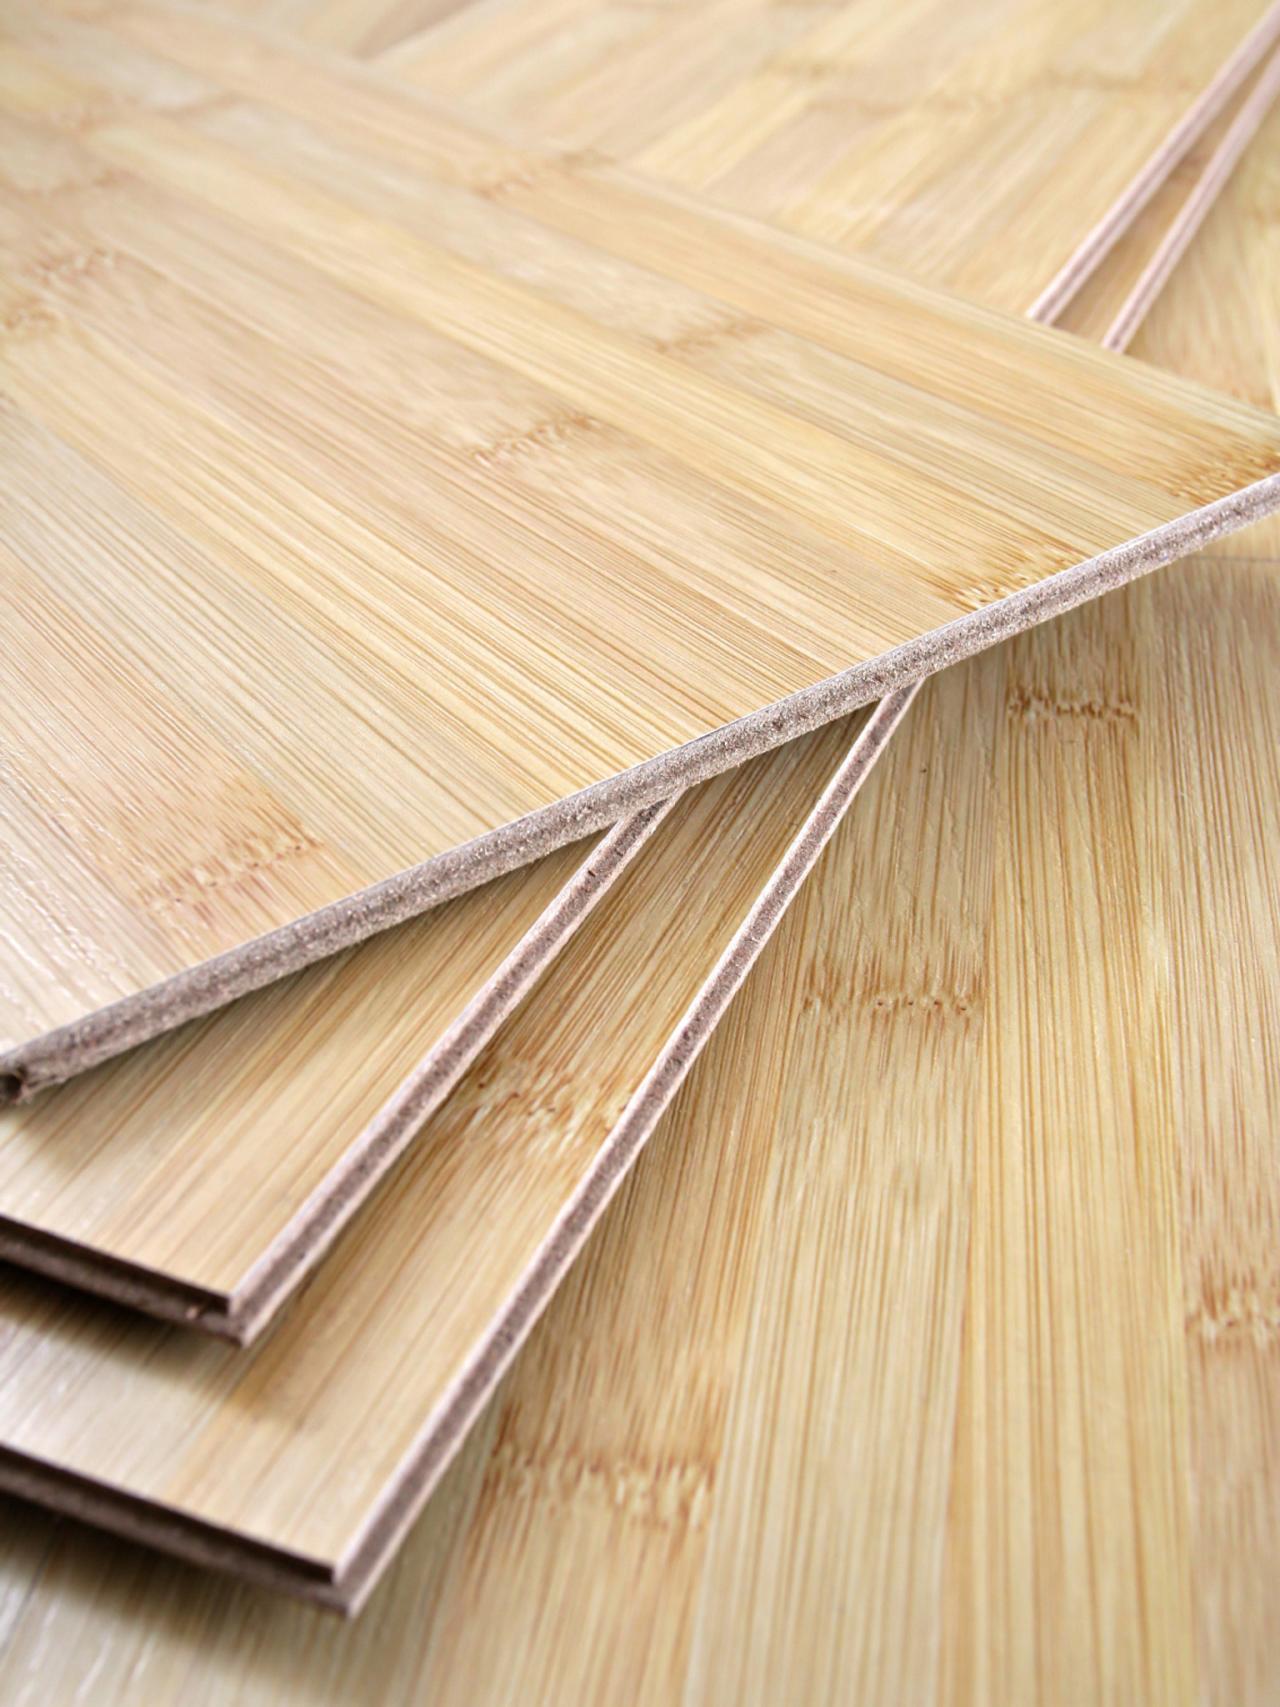 The Pros And Cons Of Bamboo Flooring Diy, Bamboo Or Laminate Flooring